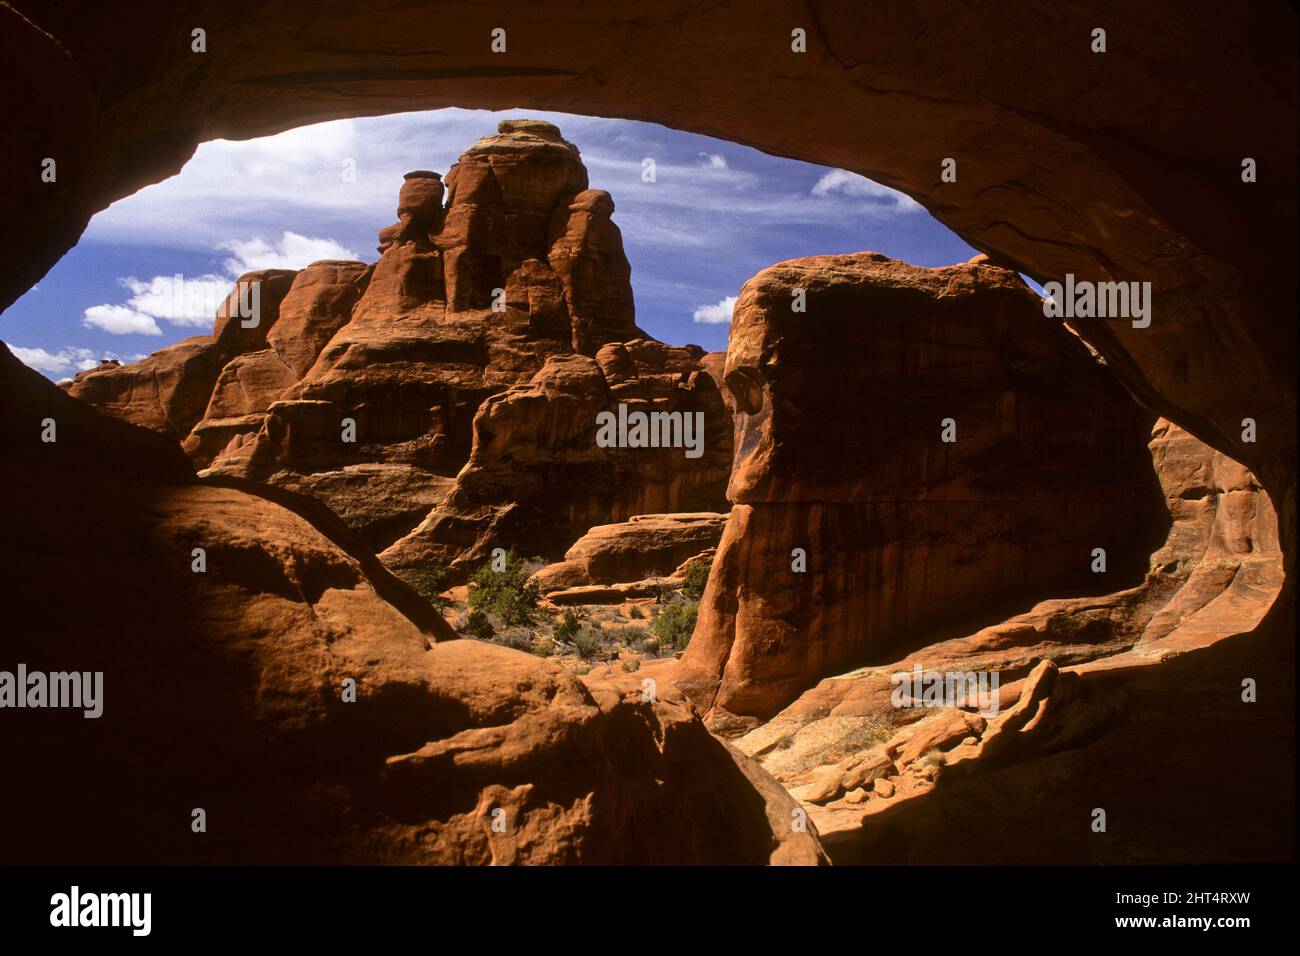 Tower Arch, with a span of 28 m, in the Klondike Bluffs section of the park which has more than 2000 natural arches. Arches National Park, Utah, USA Stock Photo